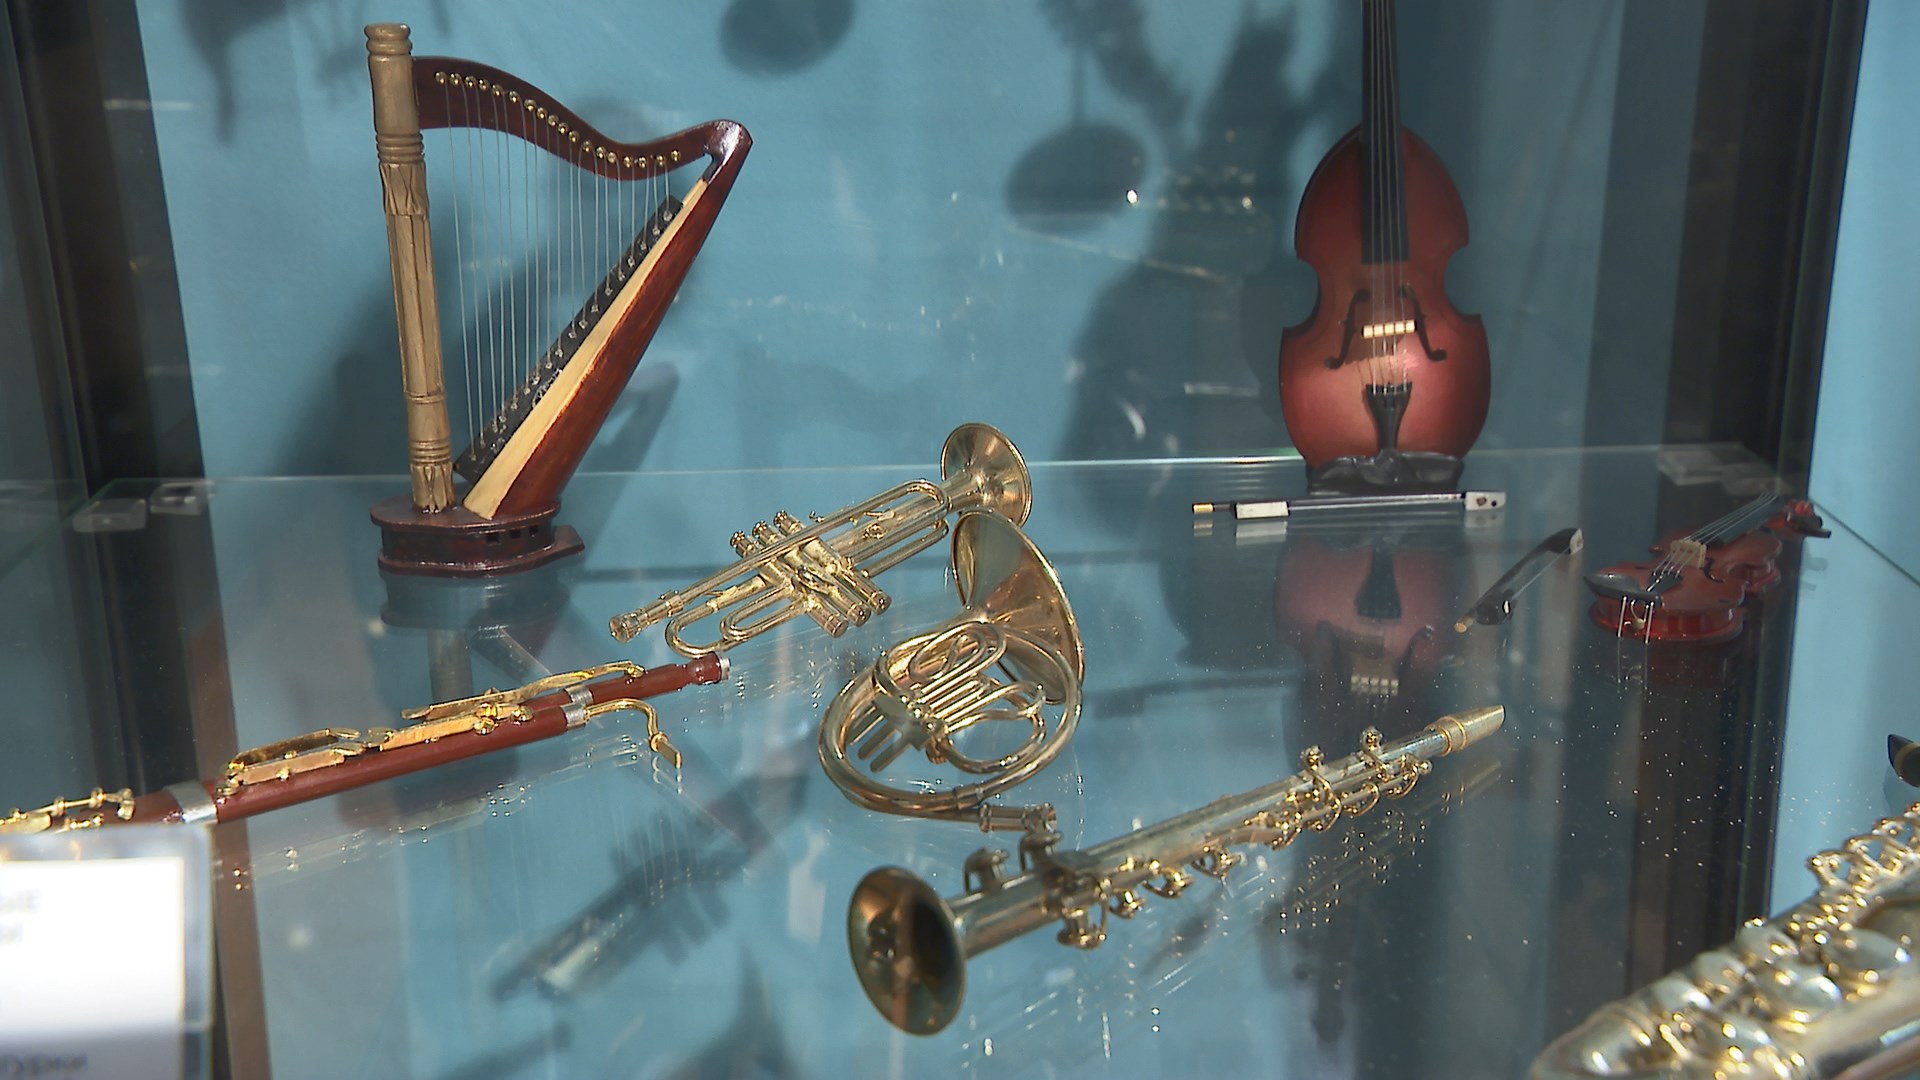 Interactive museum of music opens in Minsk